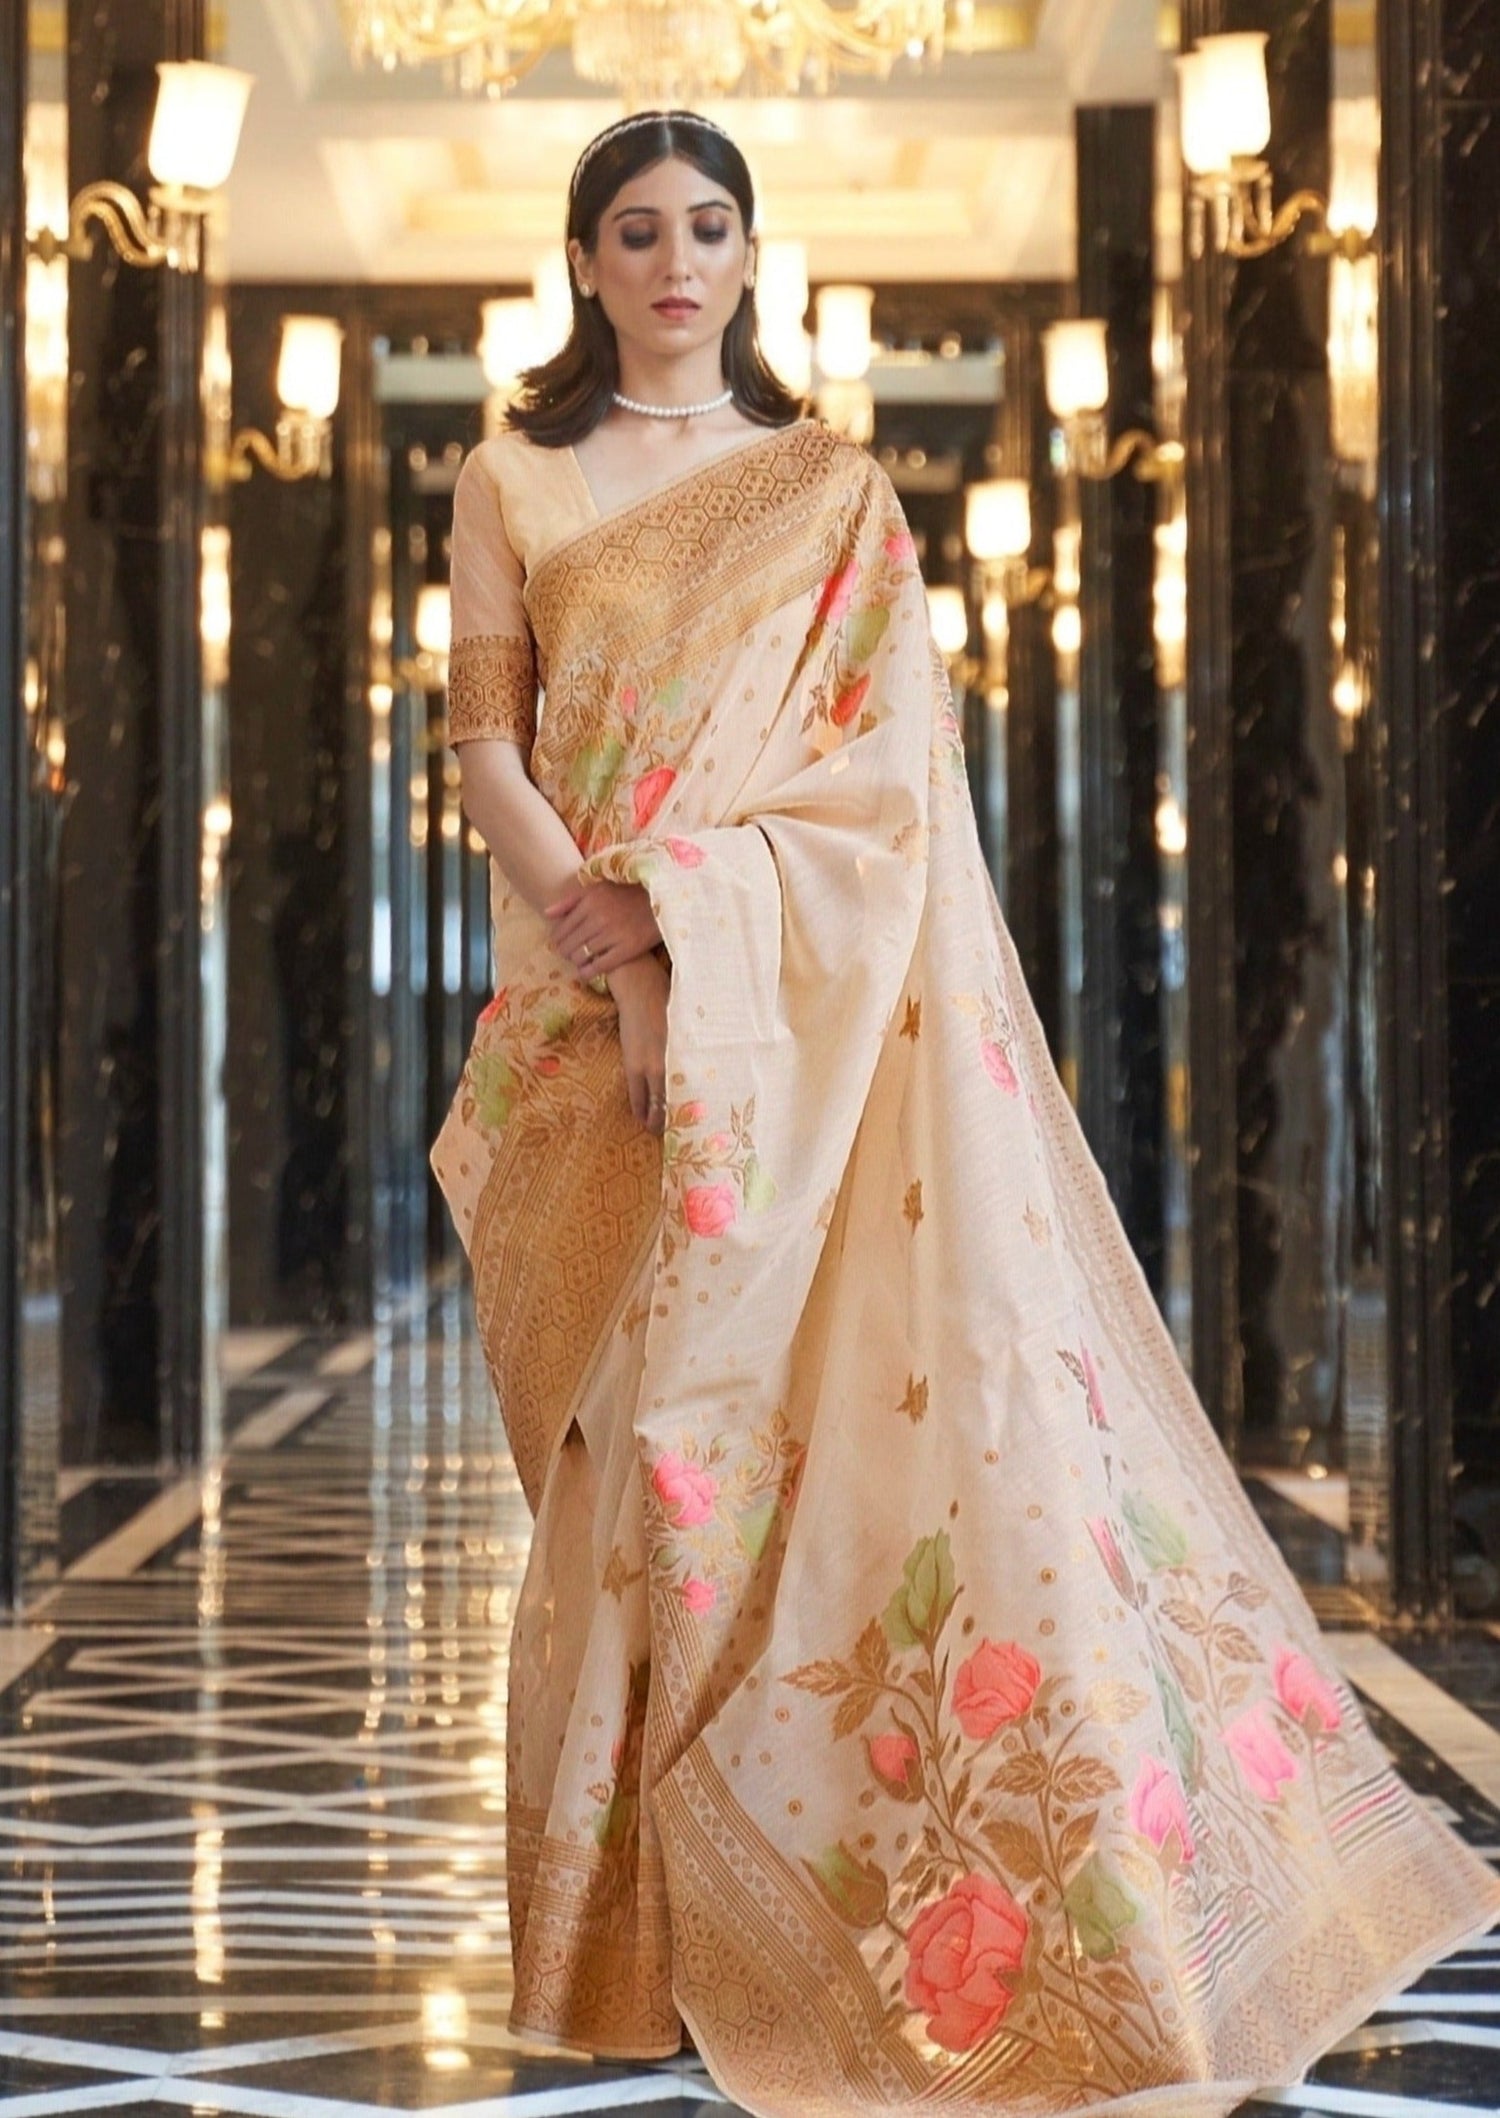 Buy best saree for wedding at Amazon.in